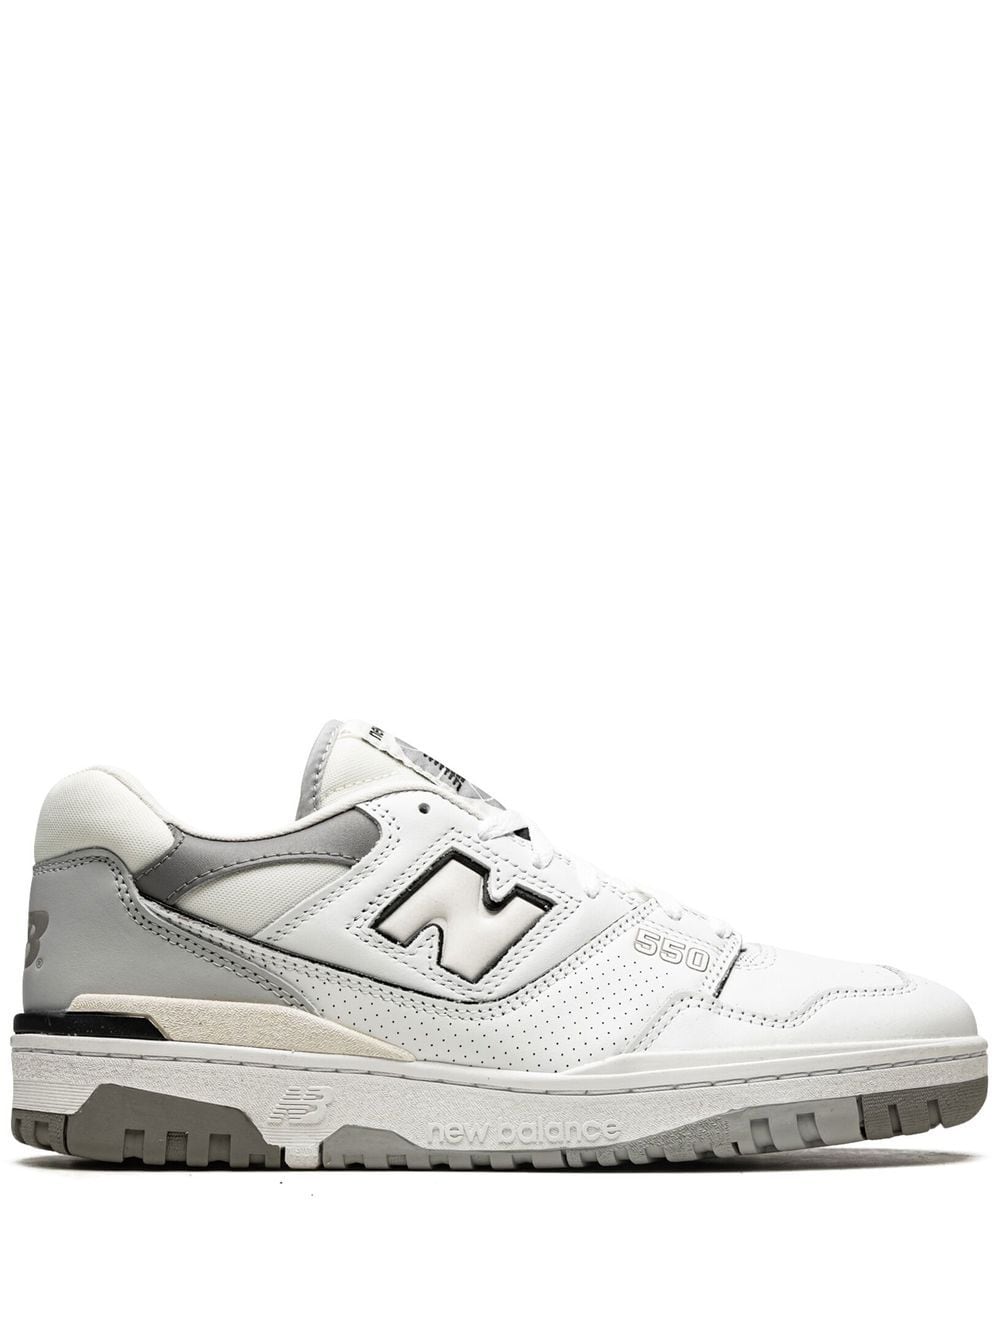 New Balance 550 "White/Marblehead" sneakers